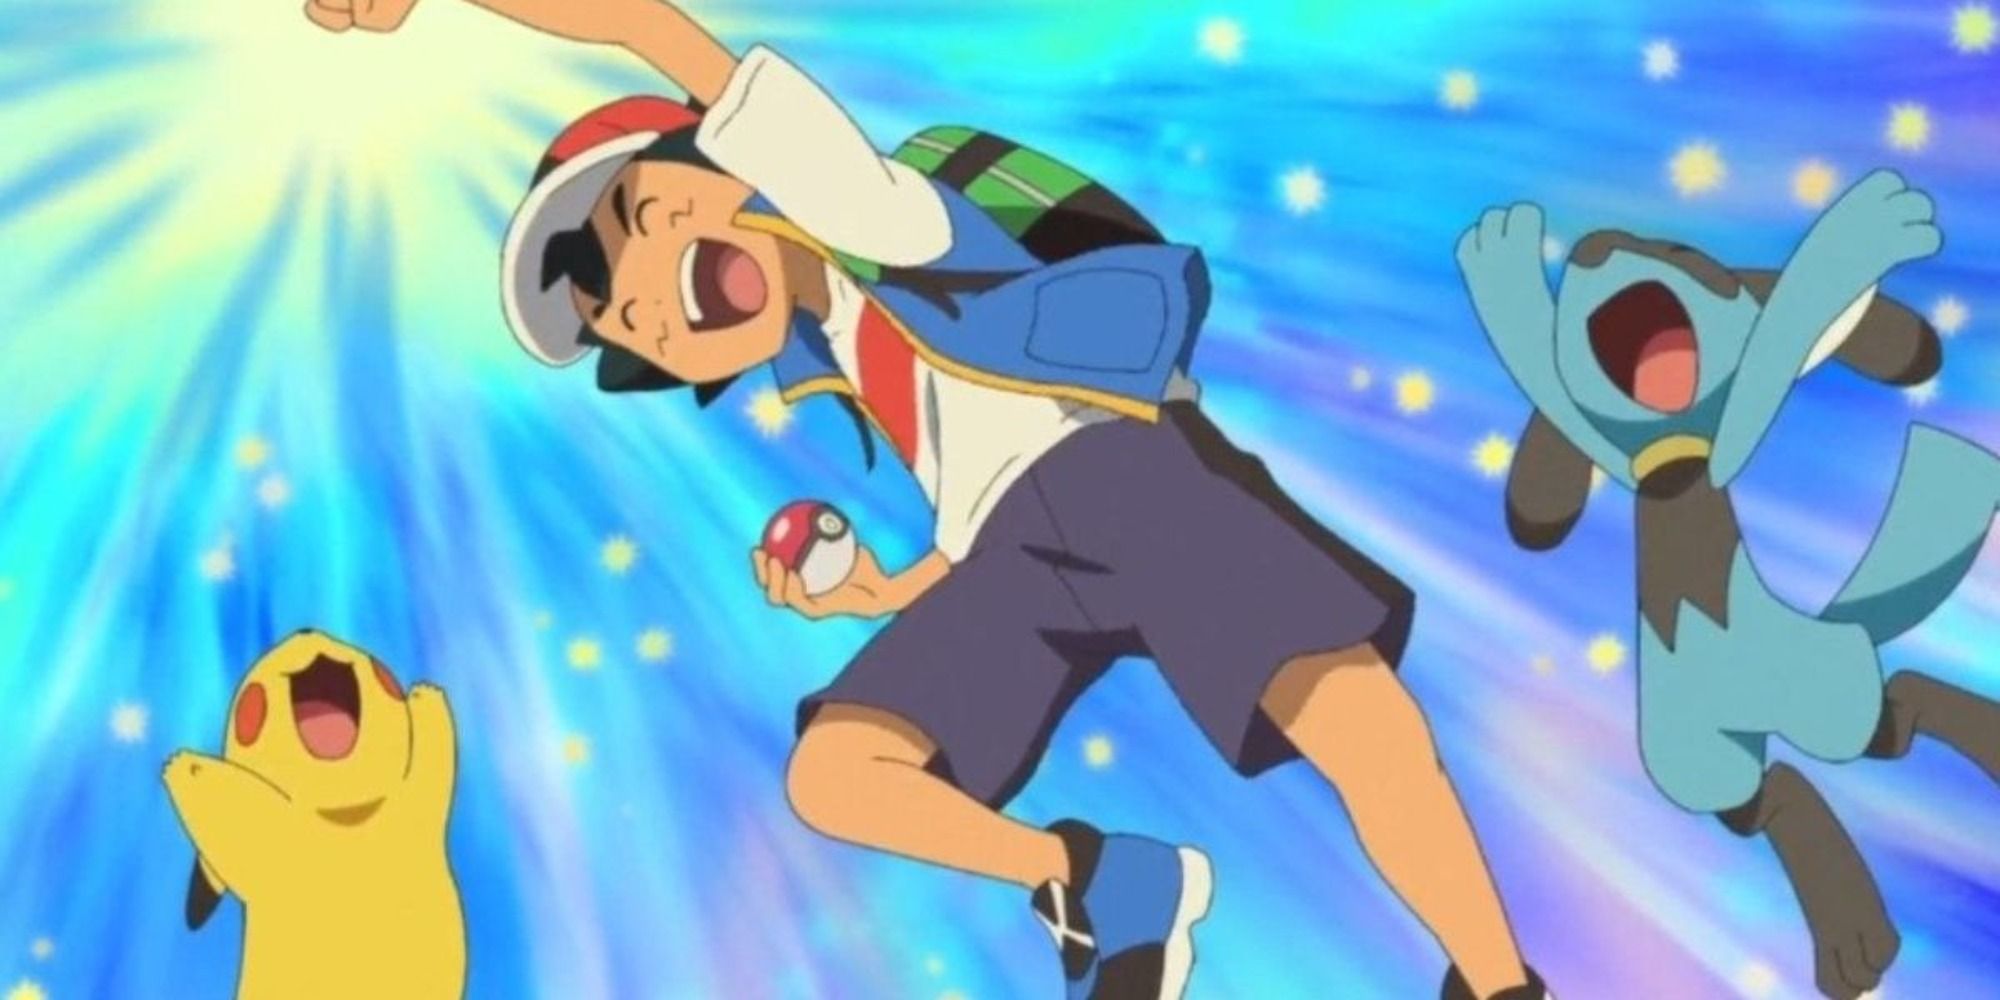 Pokémon Is Airing A One-Hour Anime Special For The 25th Anniversary